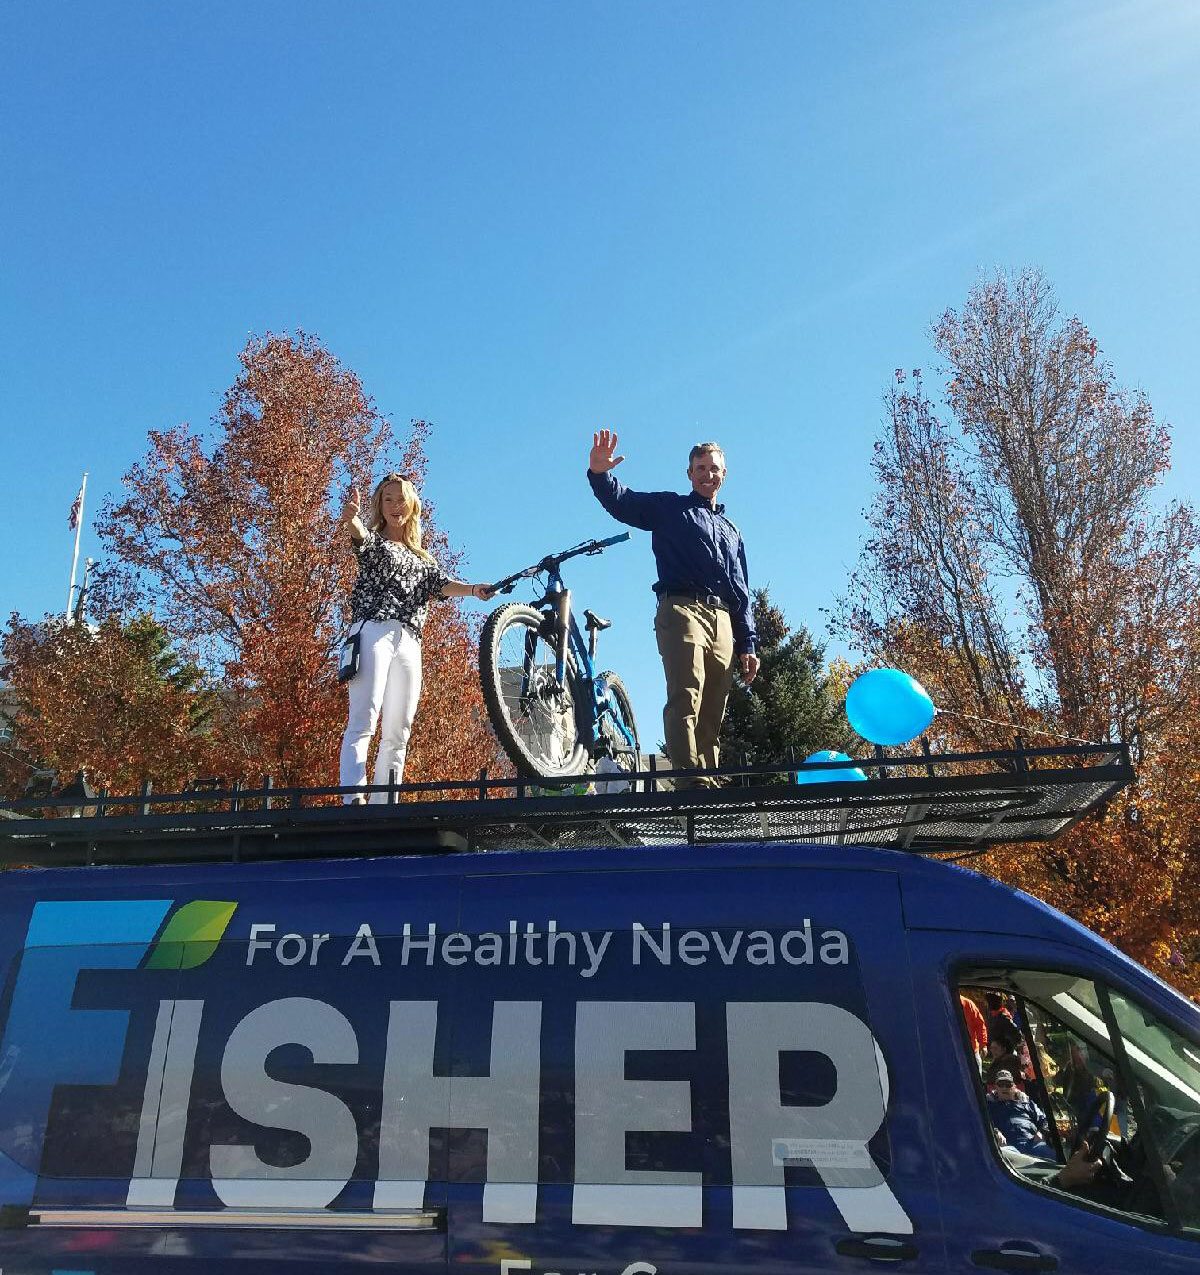 Jared and Heather waving from the Fisher for Nevada